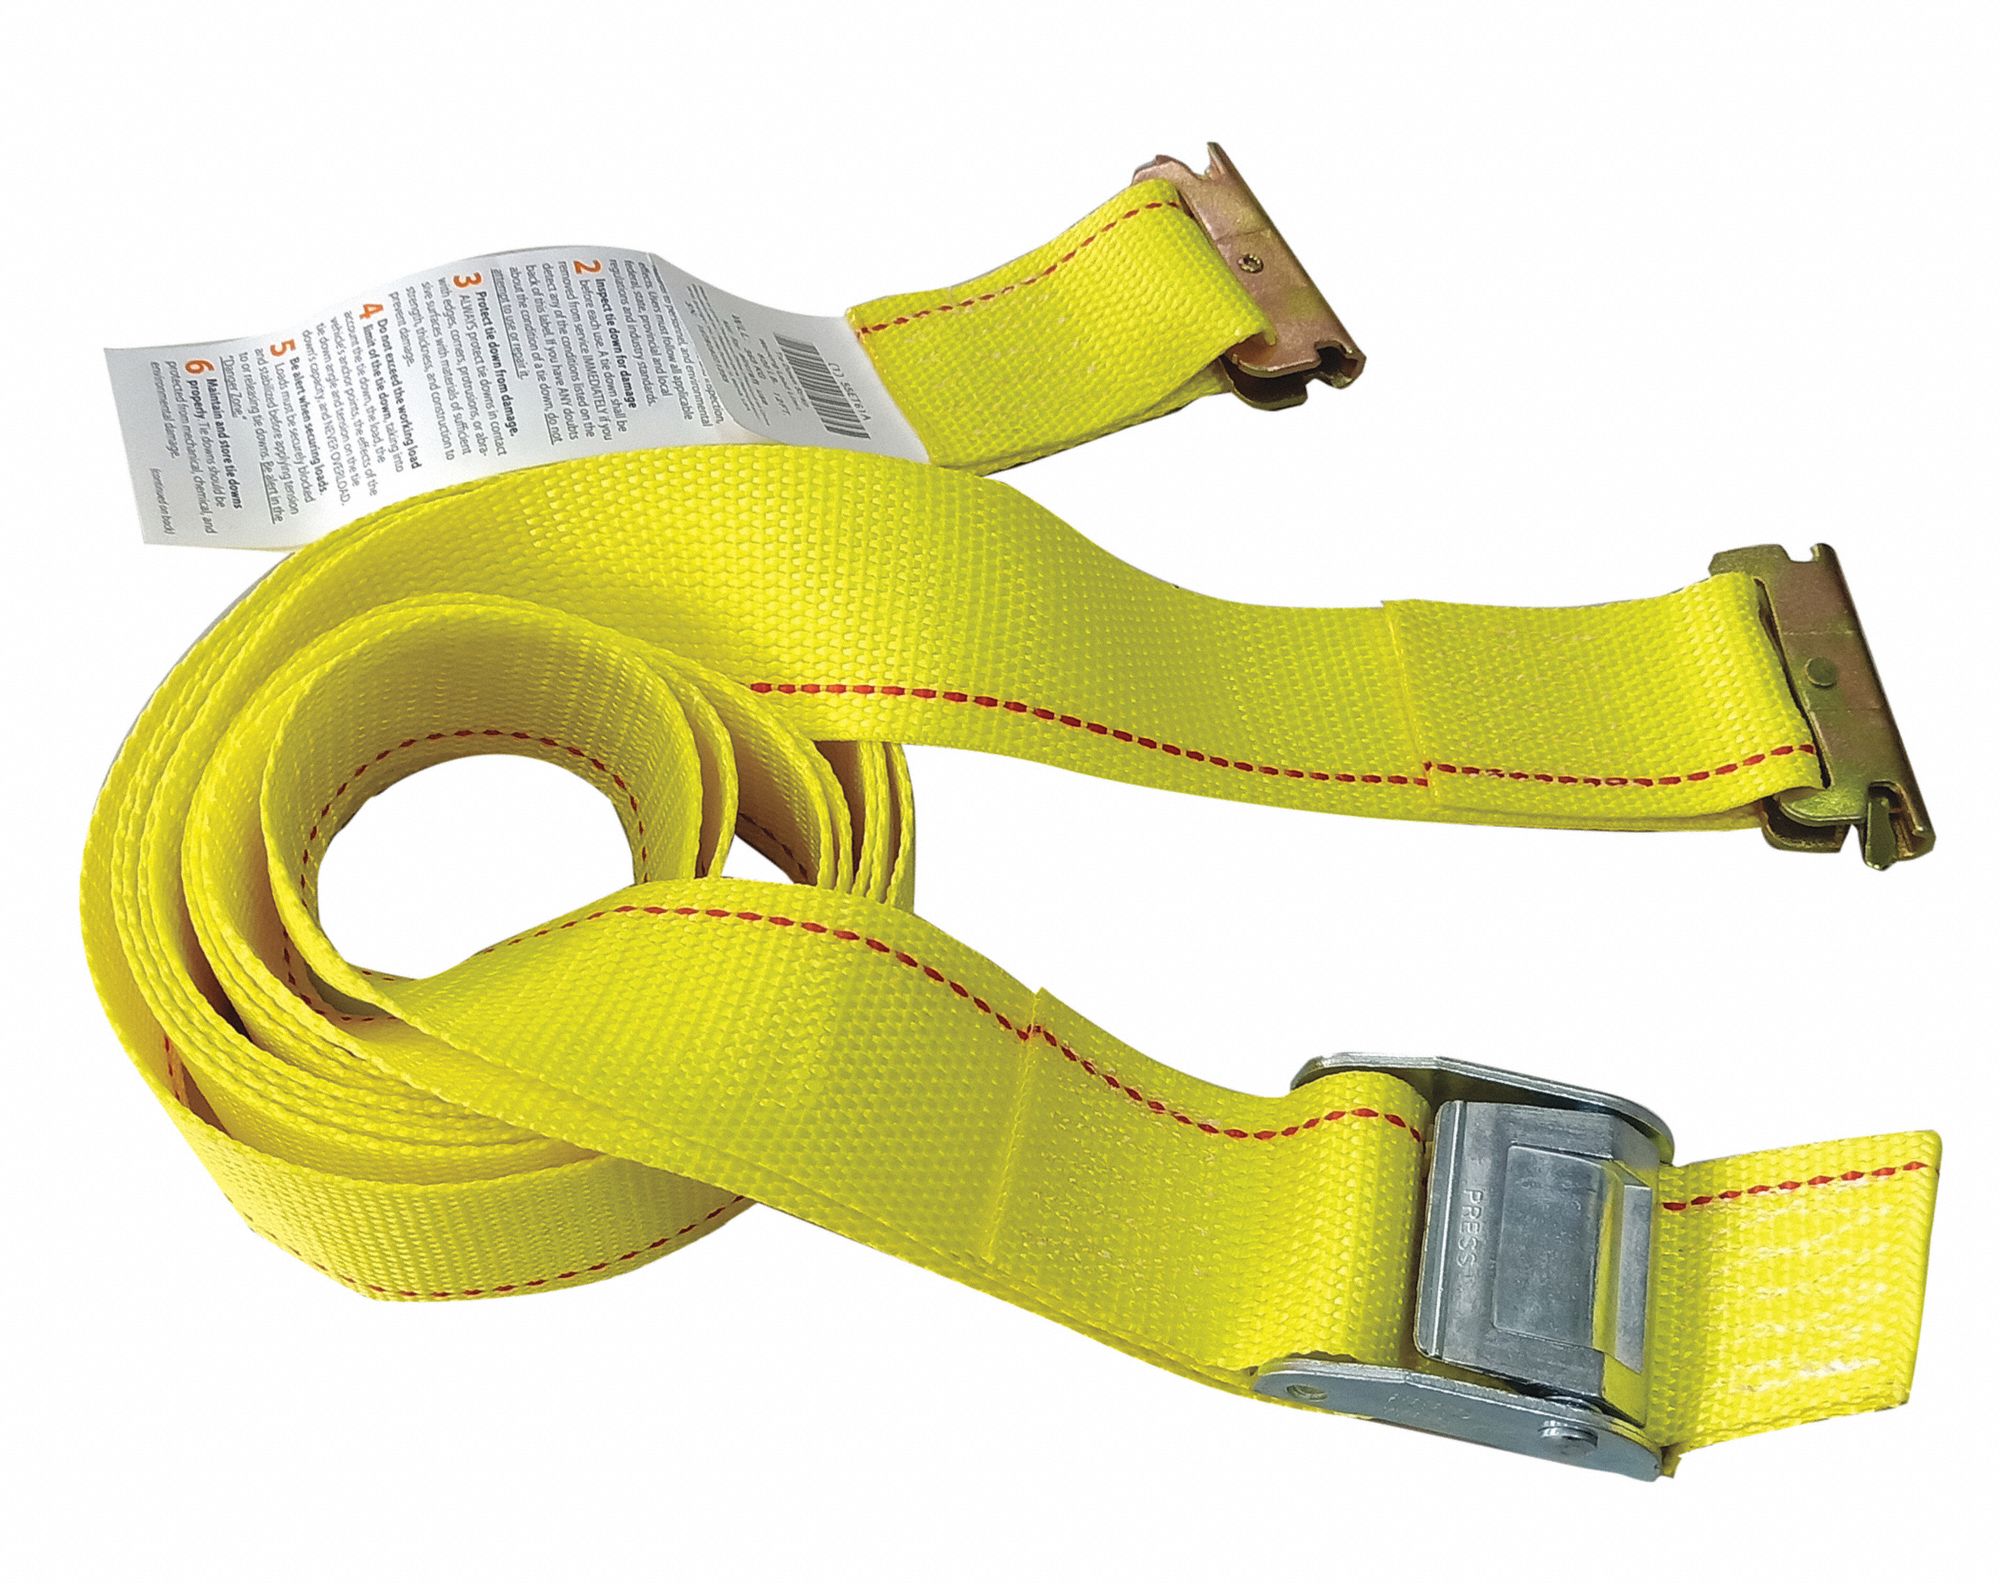 GRAINGER APPROVED Tie Down Strap, 12 ftL x 2 inW, 800 lb Load Limit ...